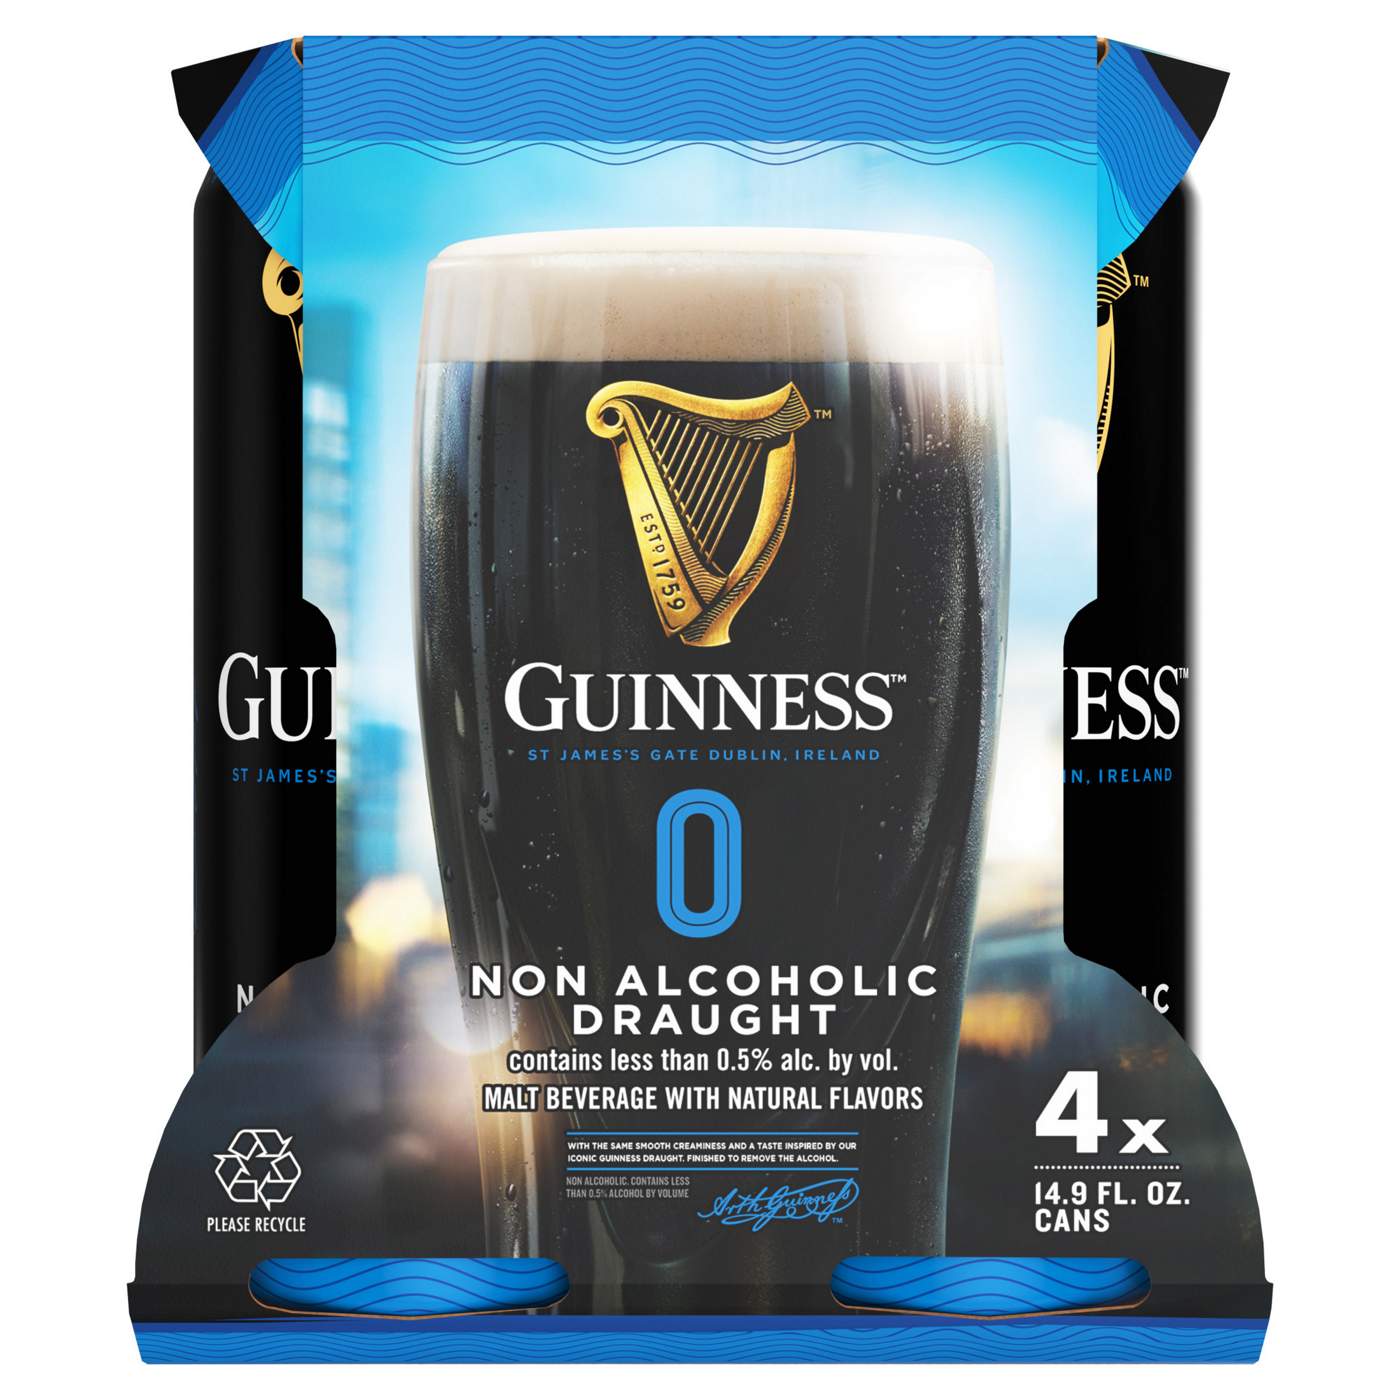 Guinness Draught 0 Non Alcoholic Stout Beer; image 1 of 4